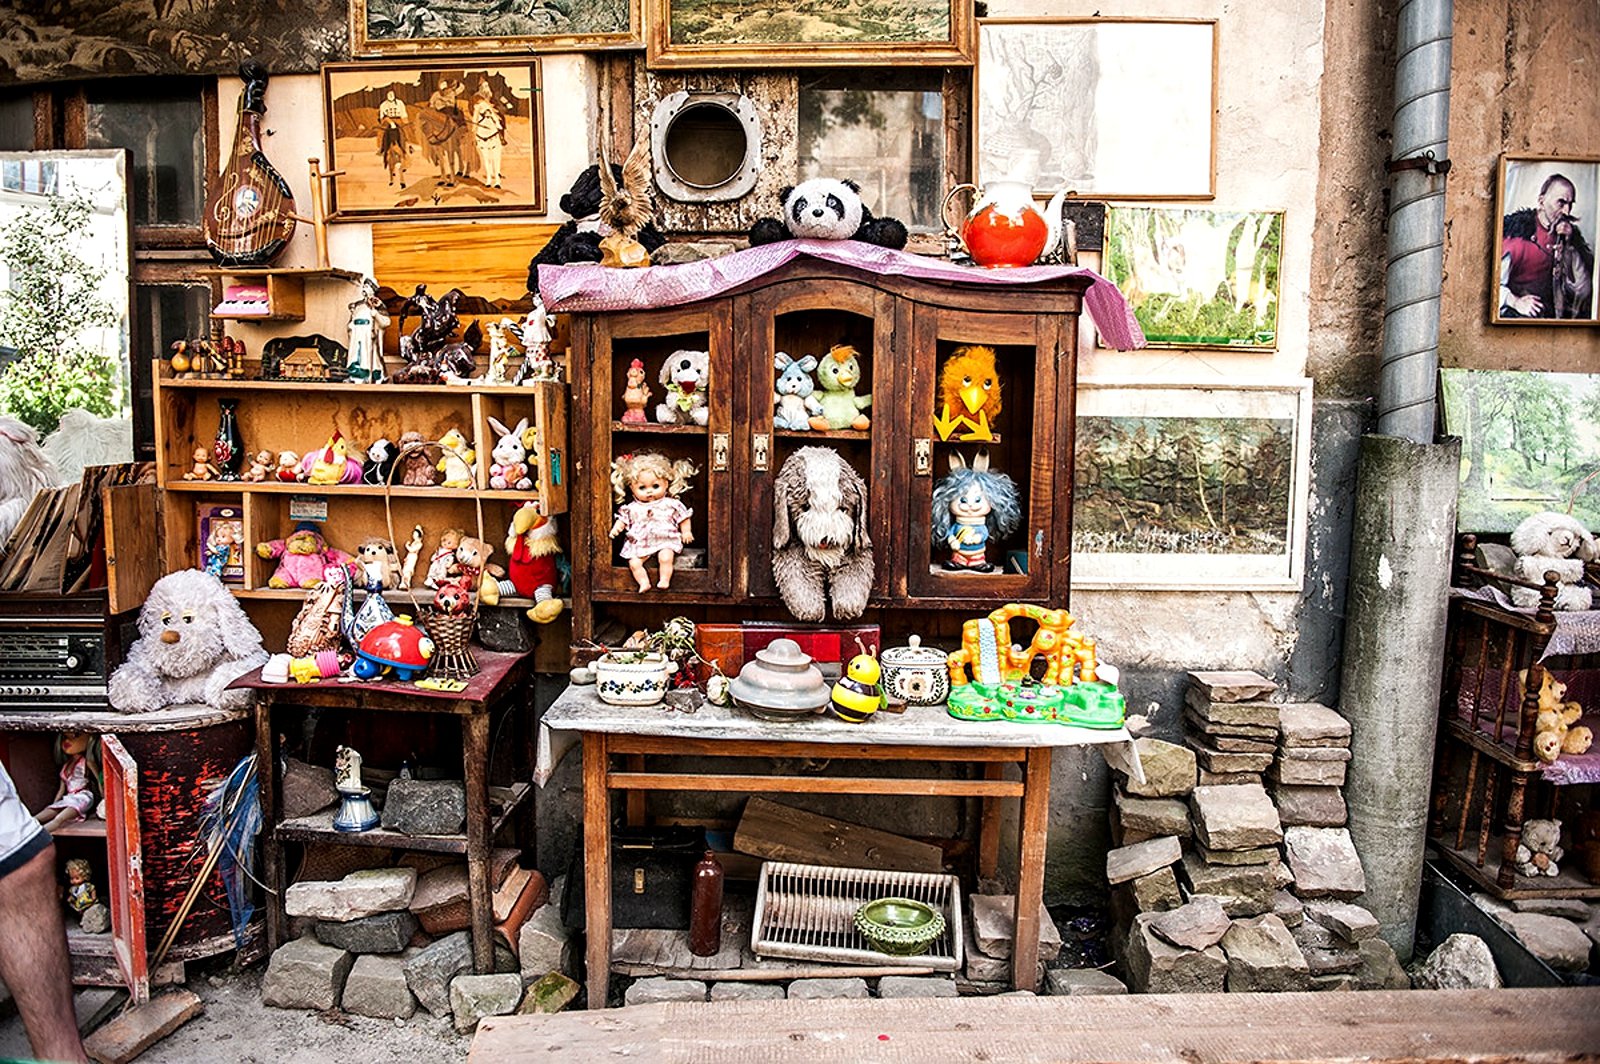 How to find the yard of lost toys in Lviv